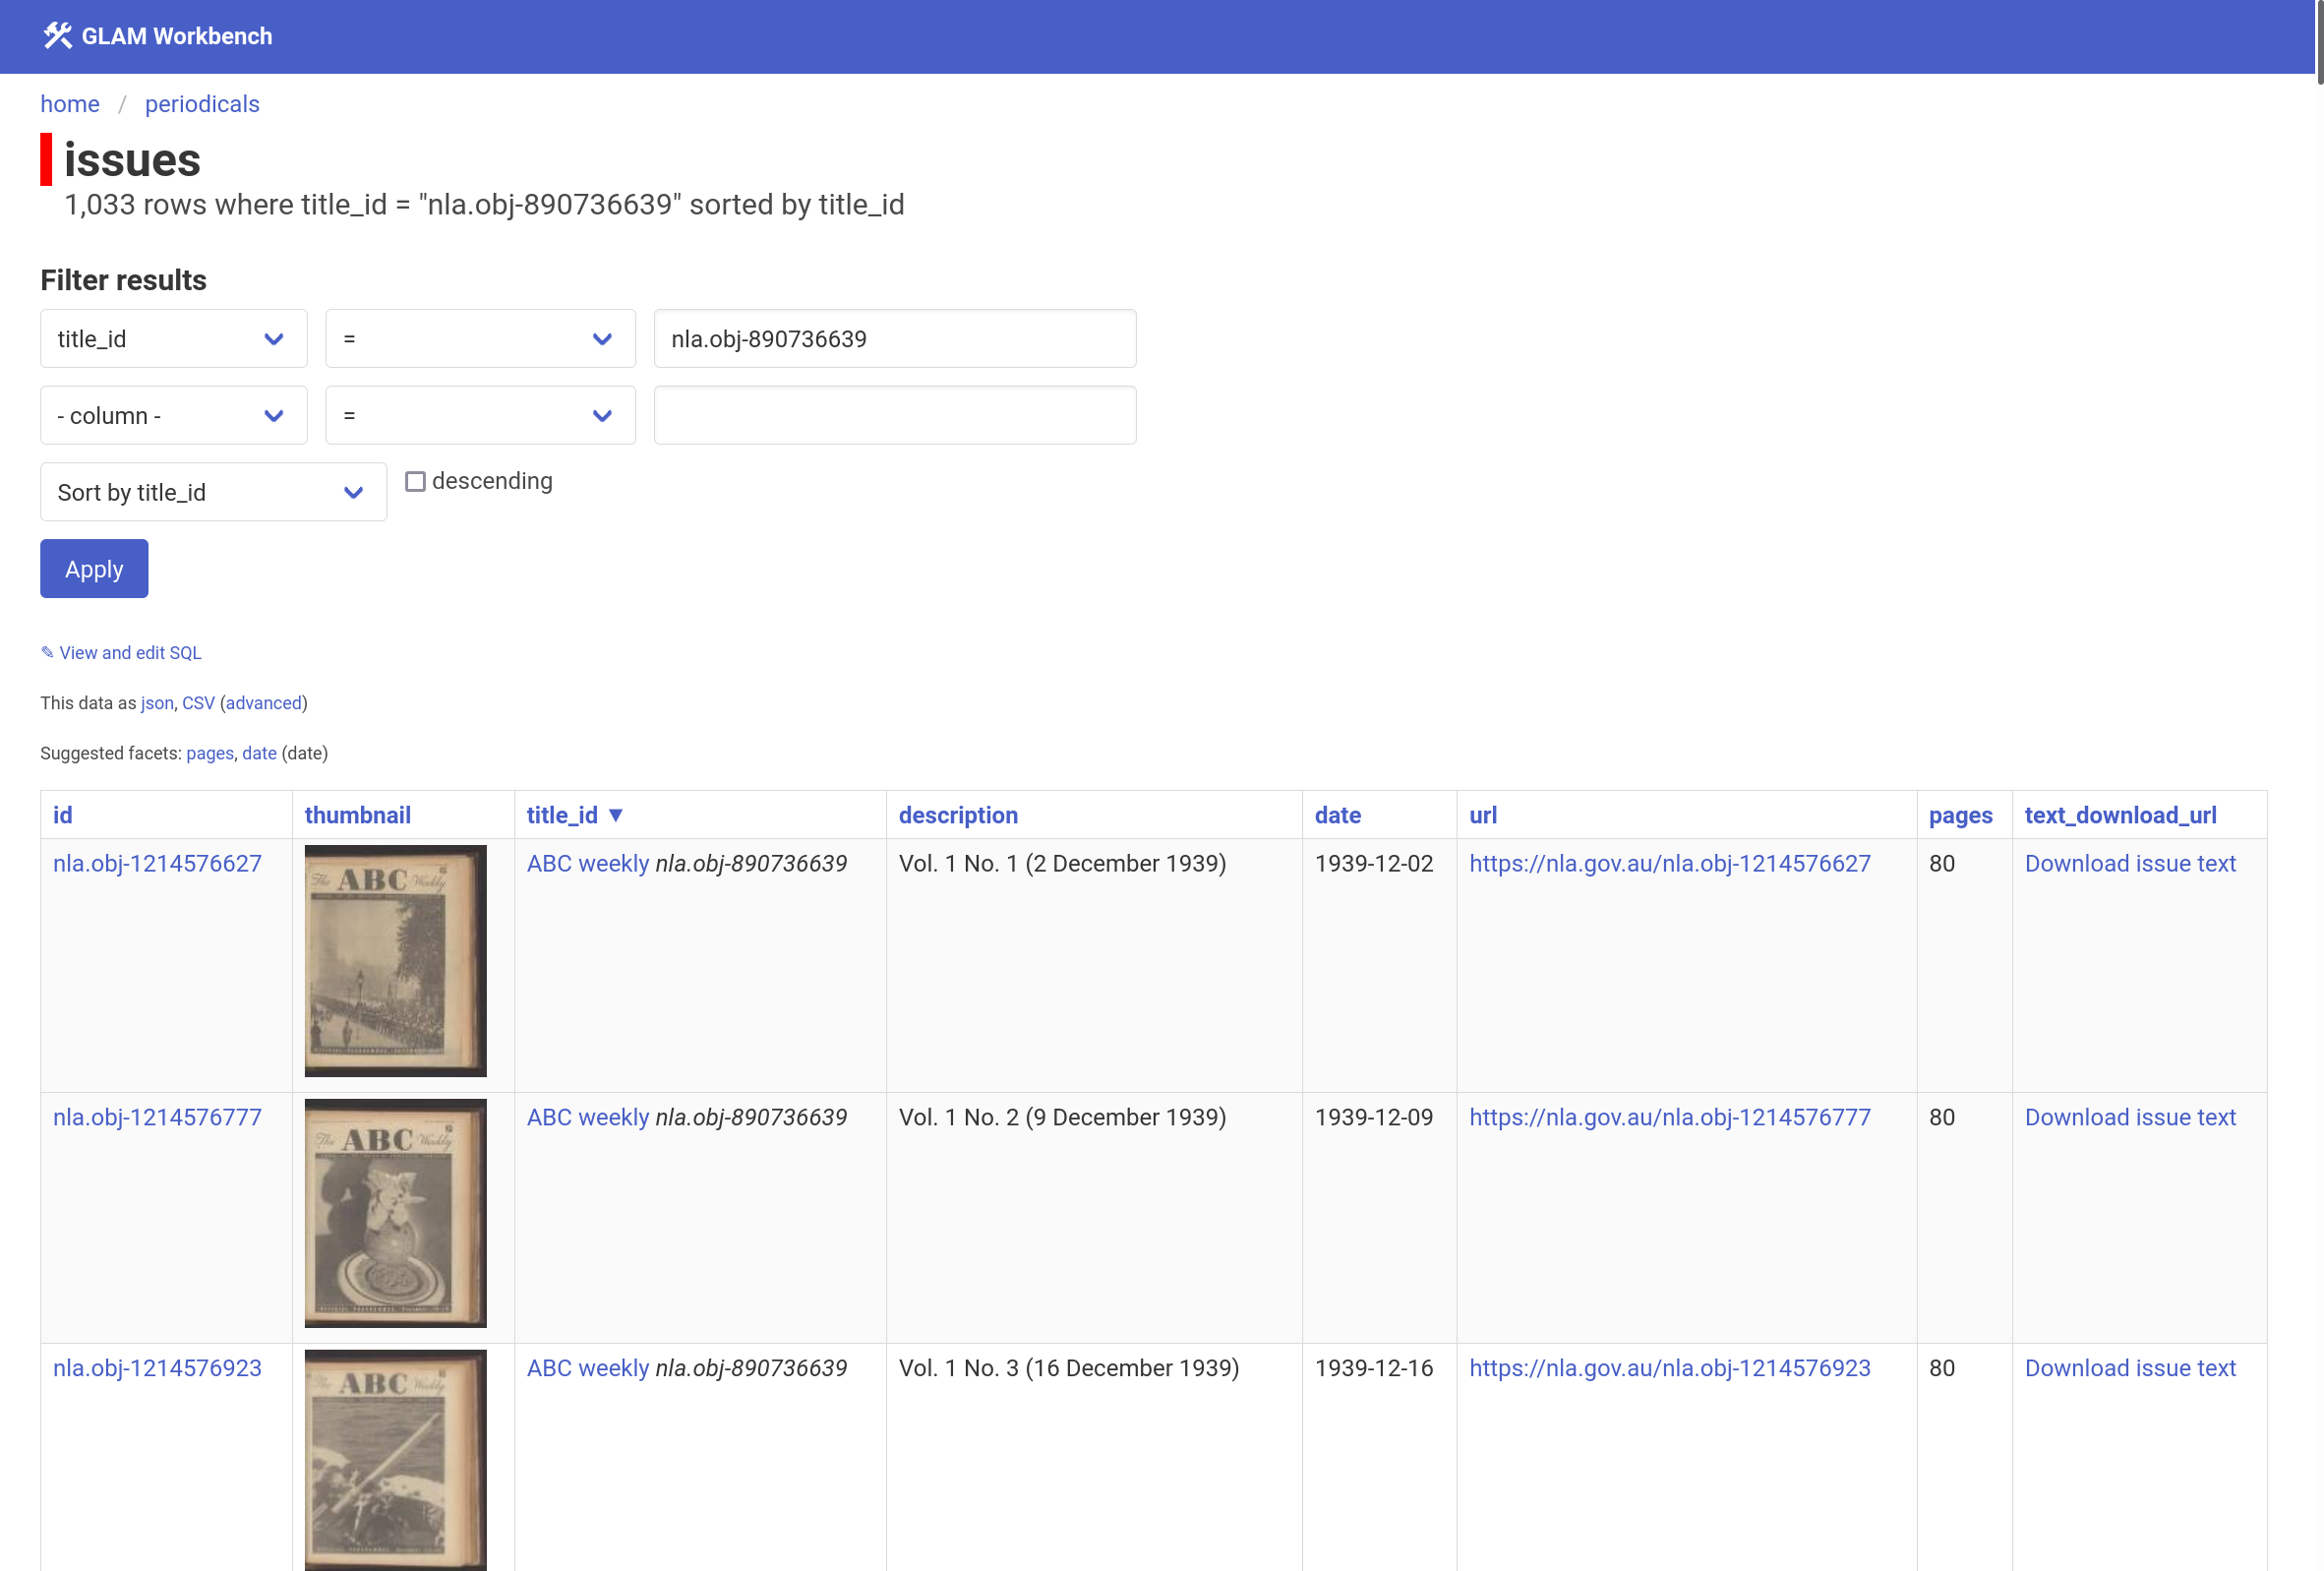 Screenshot showing a list of periodical issues